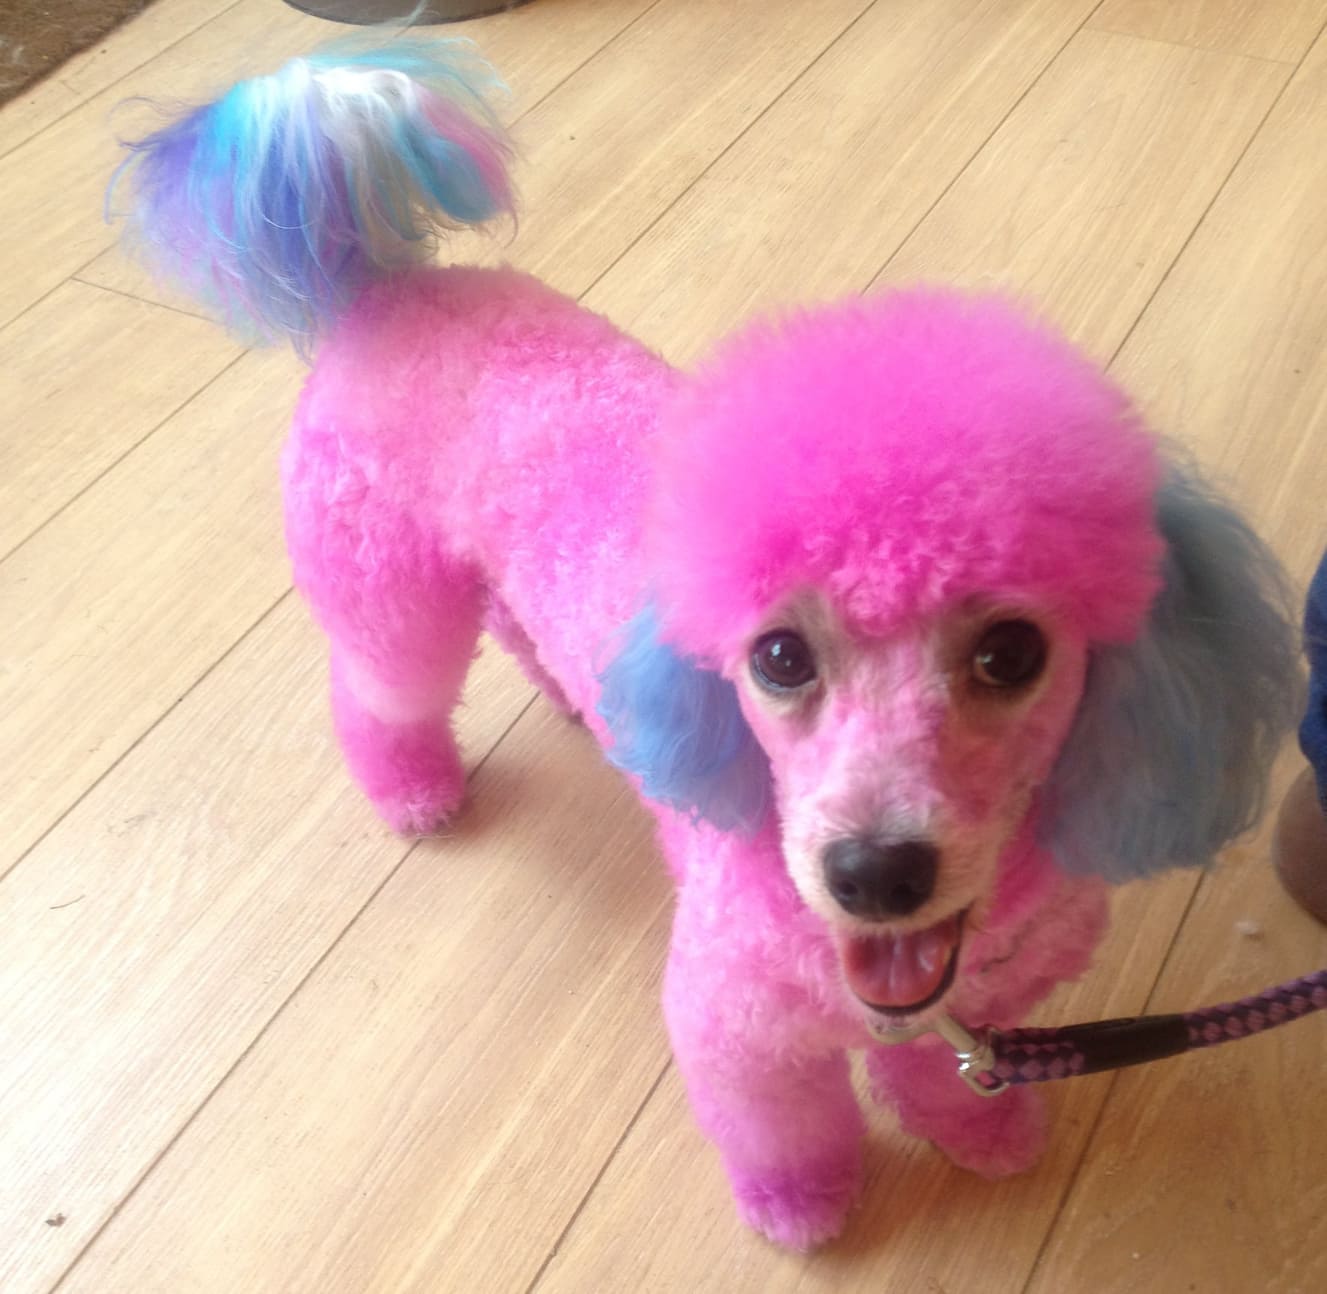 Poodle in bubble gum hairstyle with pink fur color on her body while her ears are blue and her tail is colorful